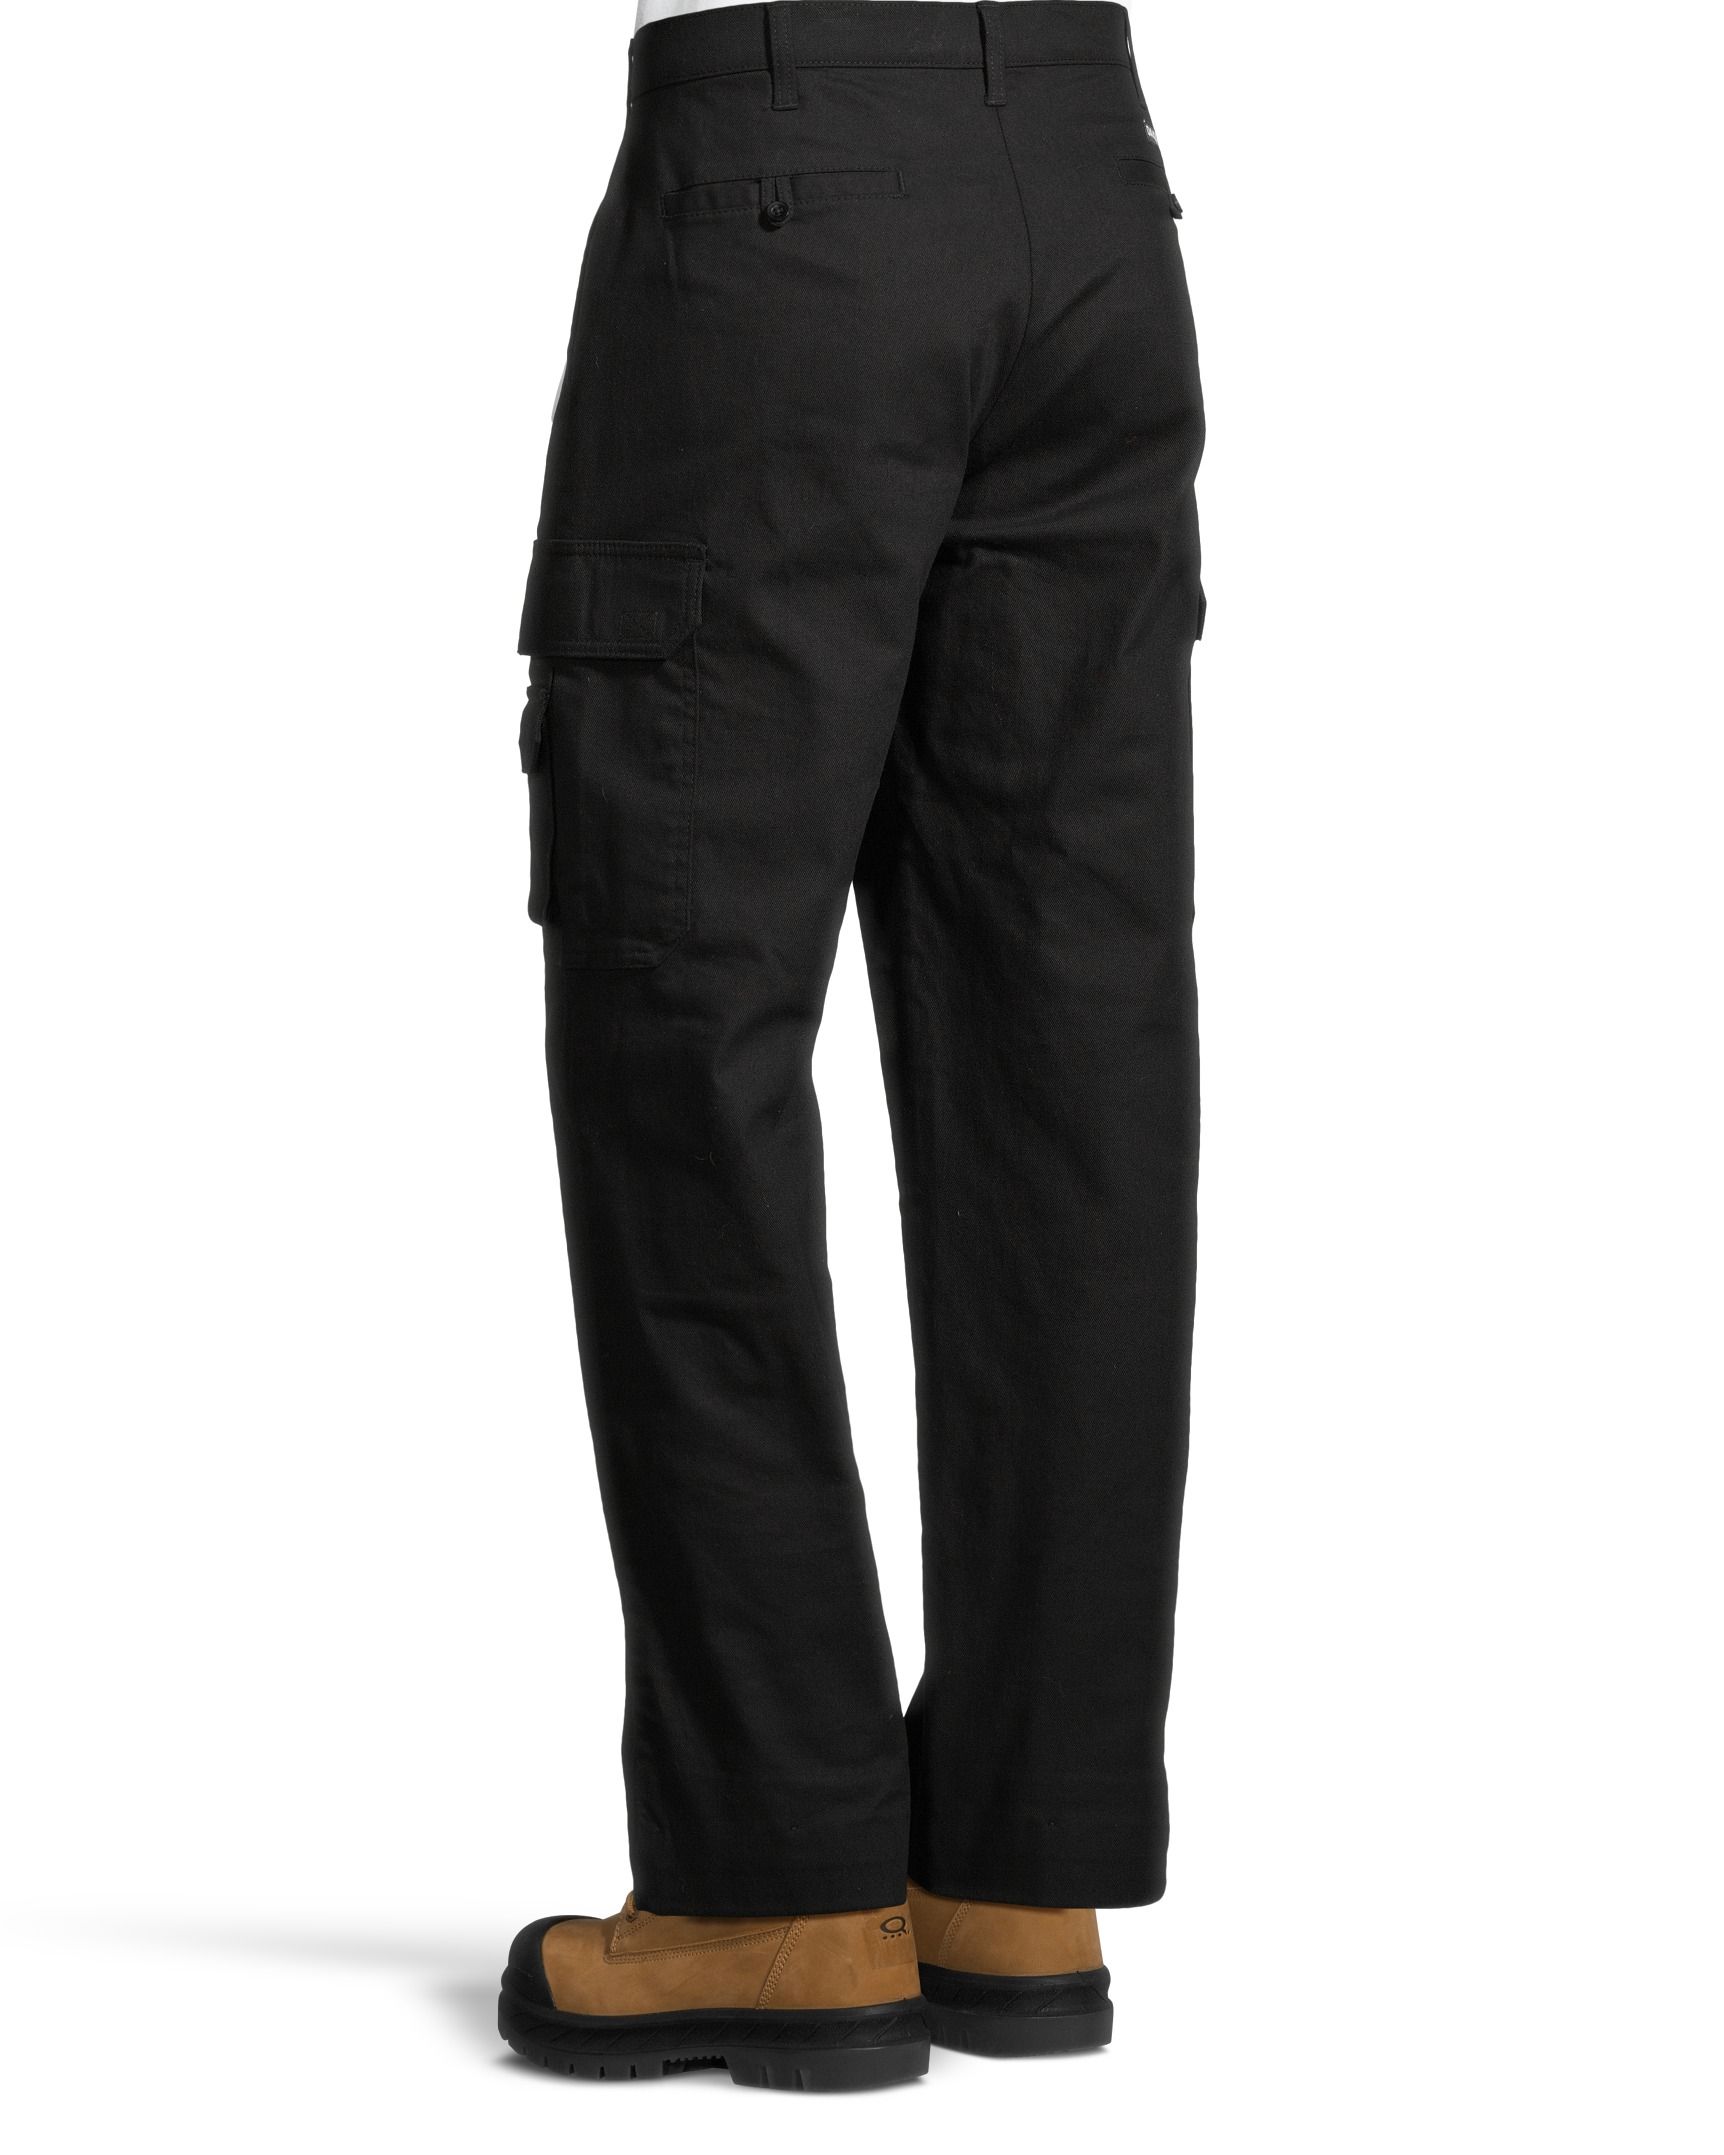 Guide Gear Men's Fleece-lined Flex Canvas Cargo Work Pants - 607608,  Insulated Pants, Overalls & Coveralls at Sportsman's Guide